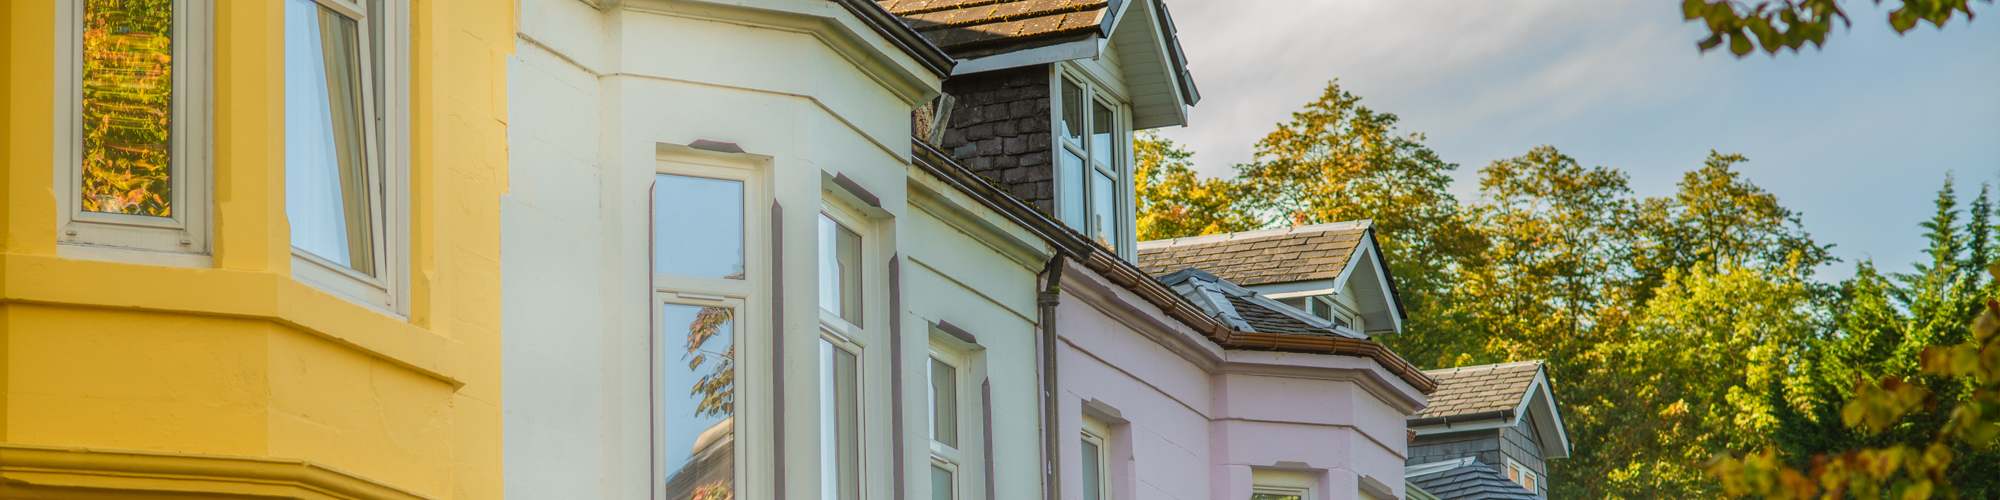 Contractor Mortgages from SAM Conveyancing. A leafy urban Victorian terrace of bright painted houses